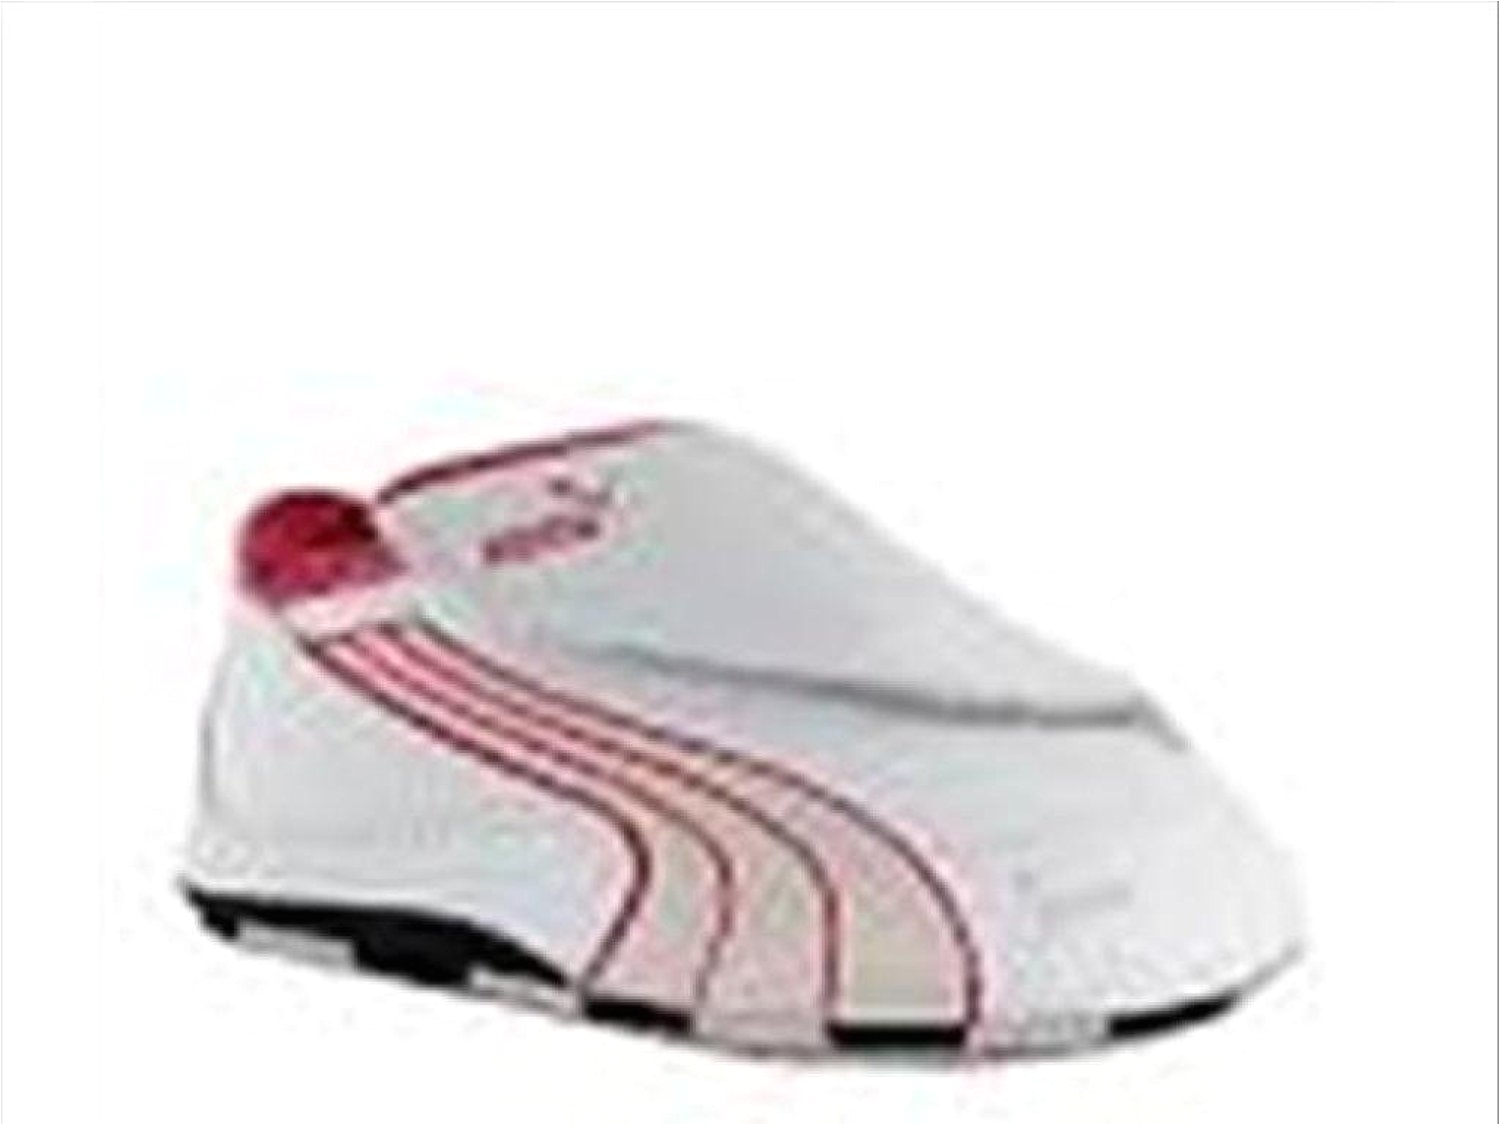 puma drif cat 4 lw 30398109 size 2 uk shoes white and pink baby boys bootiespuma drift catpopular